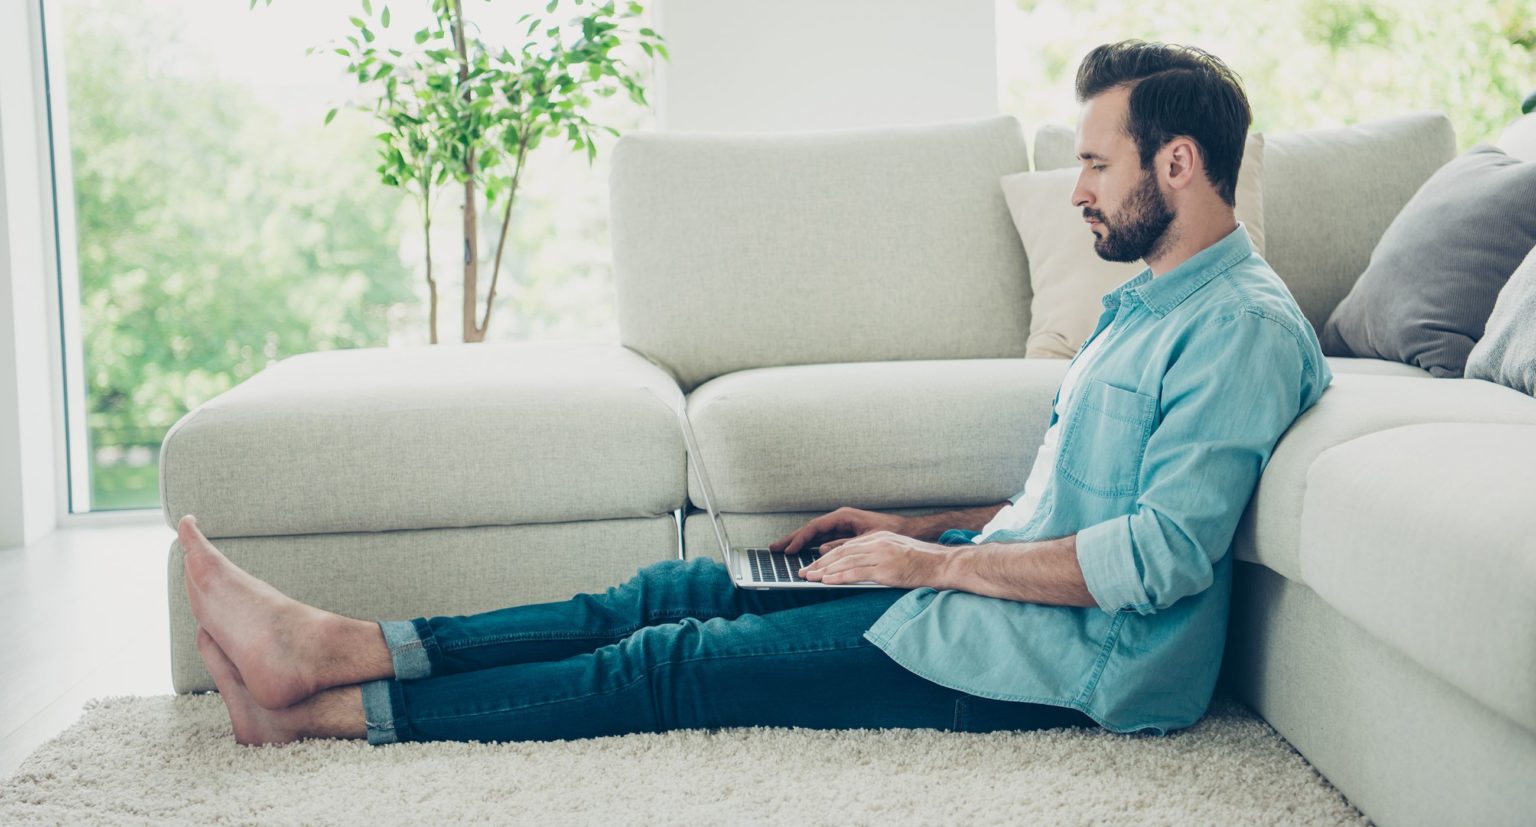 Man sitting on area rug in living room